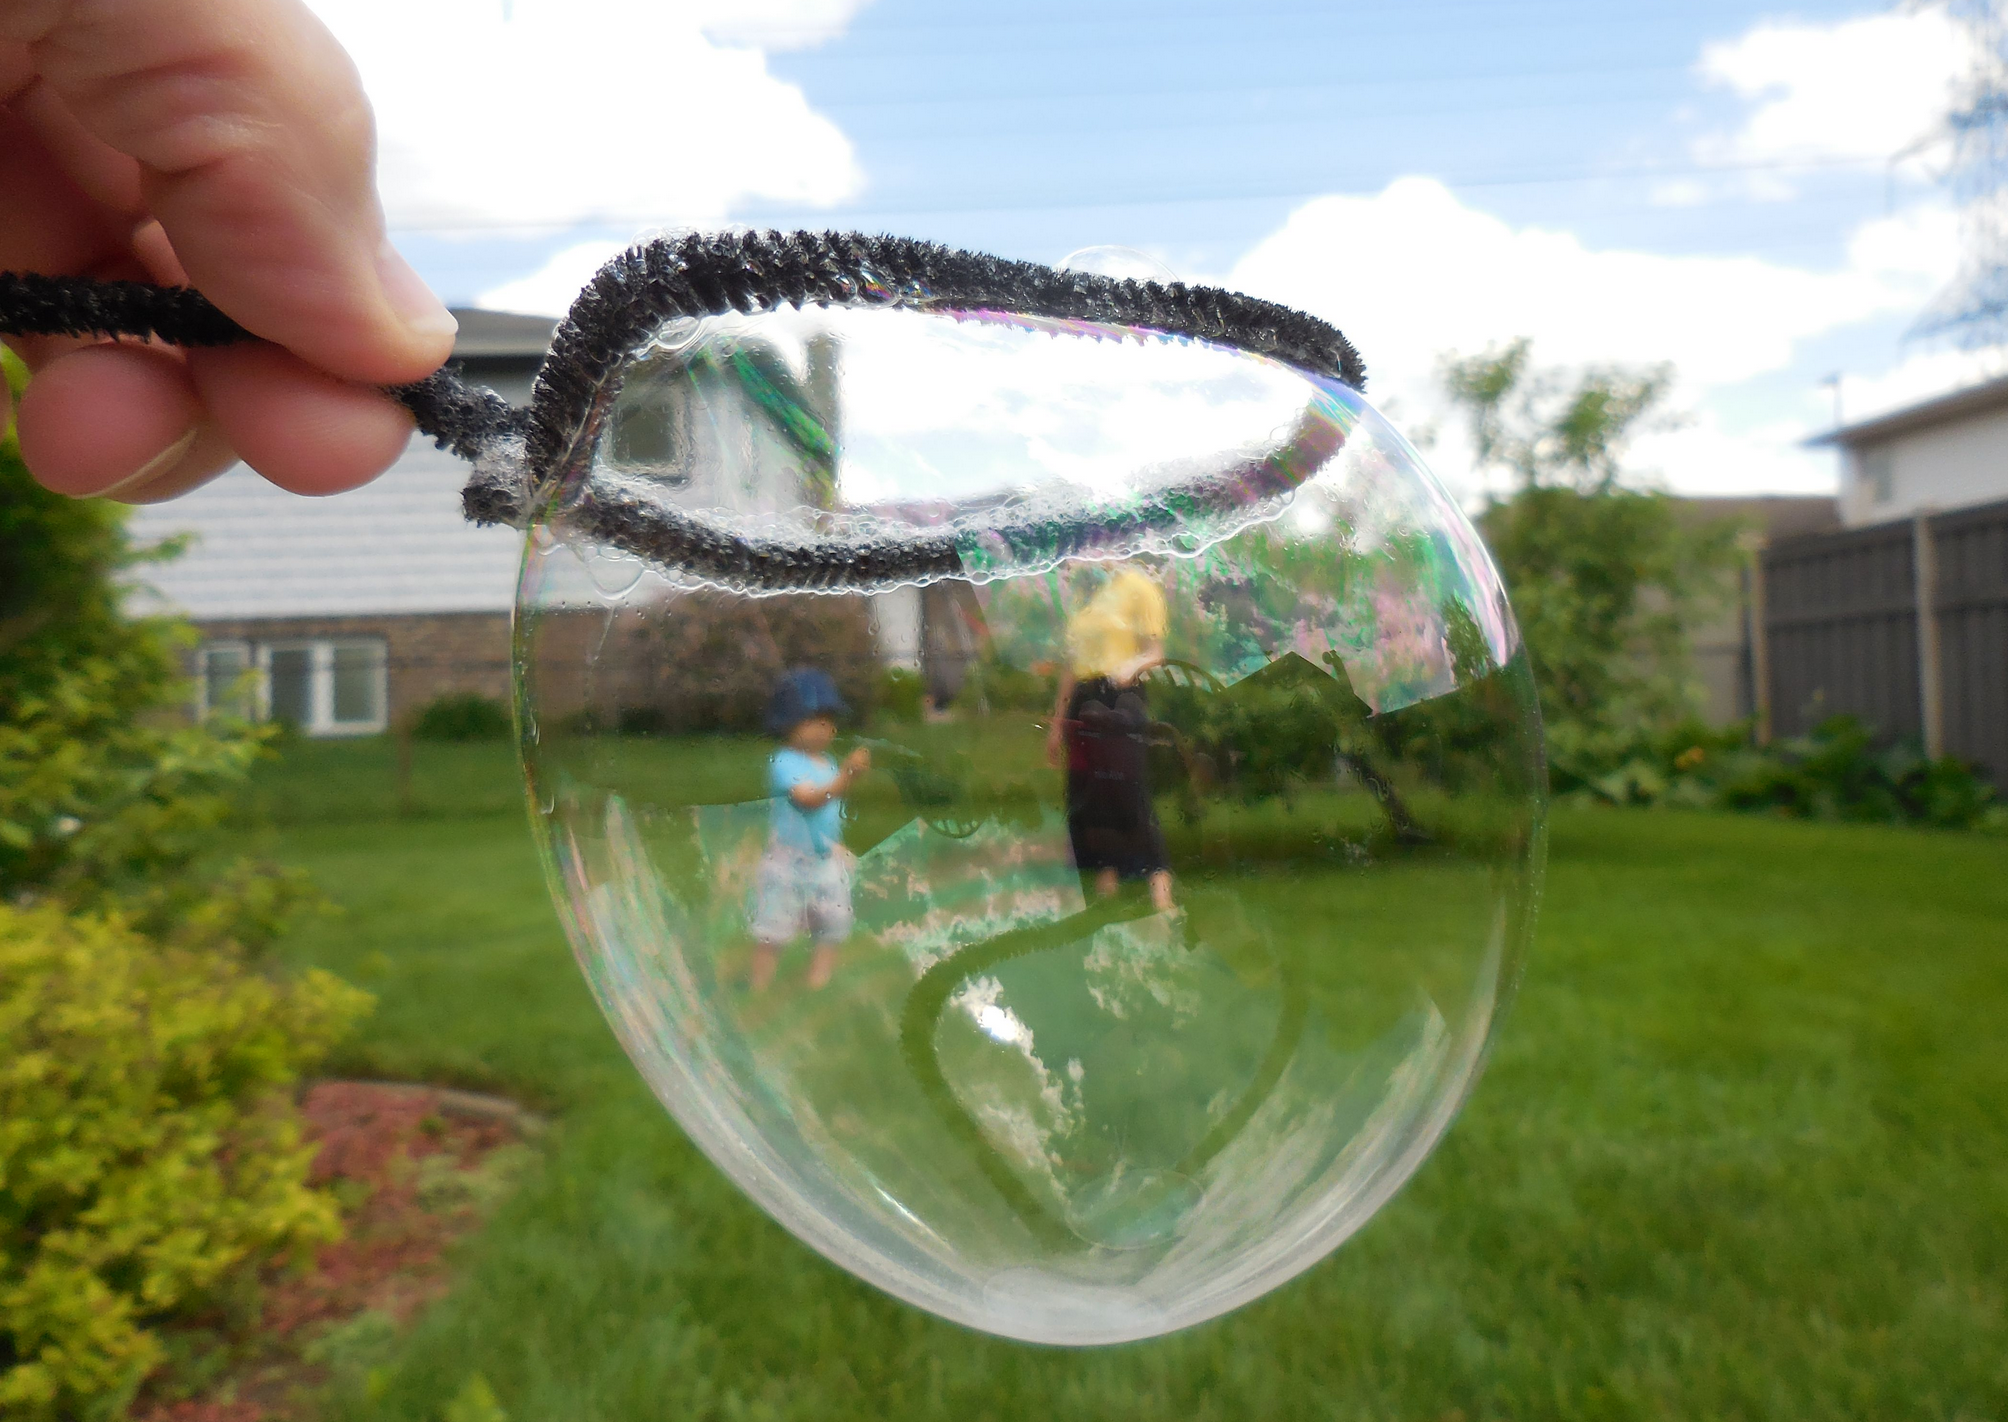 Hand holding bubble wand with bubble in it